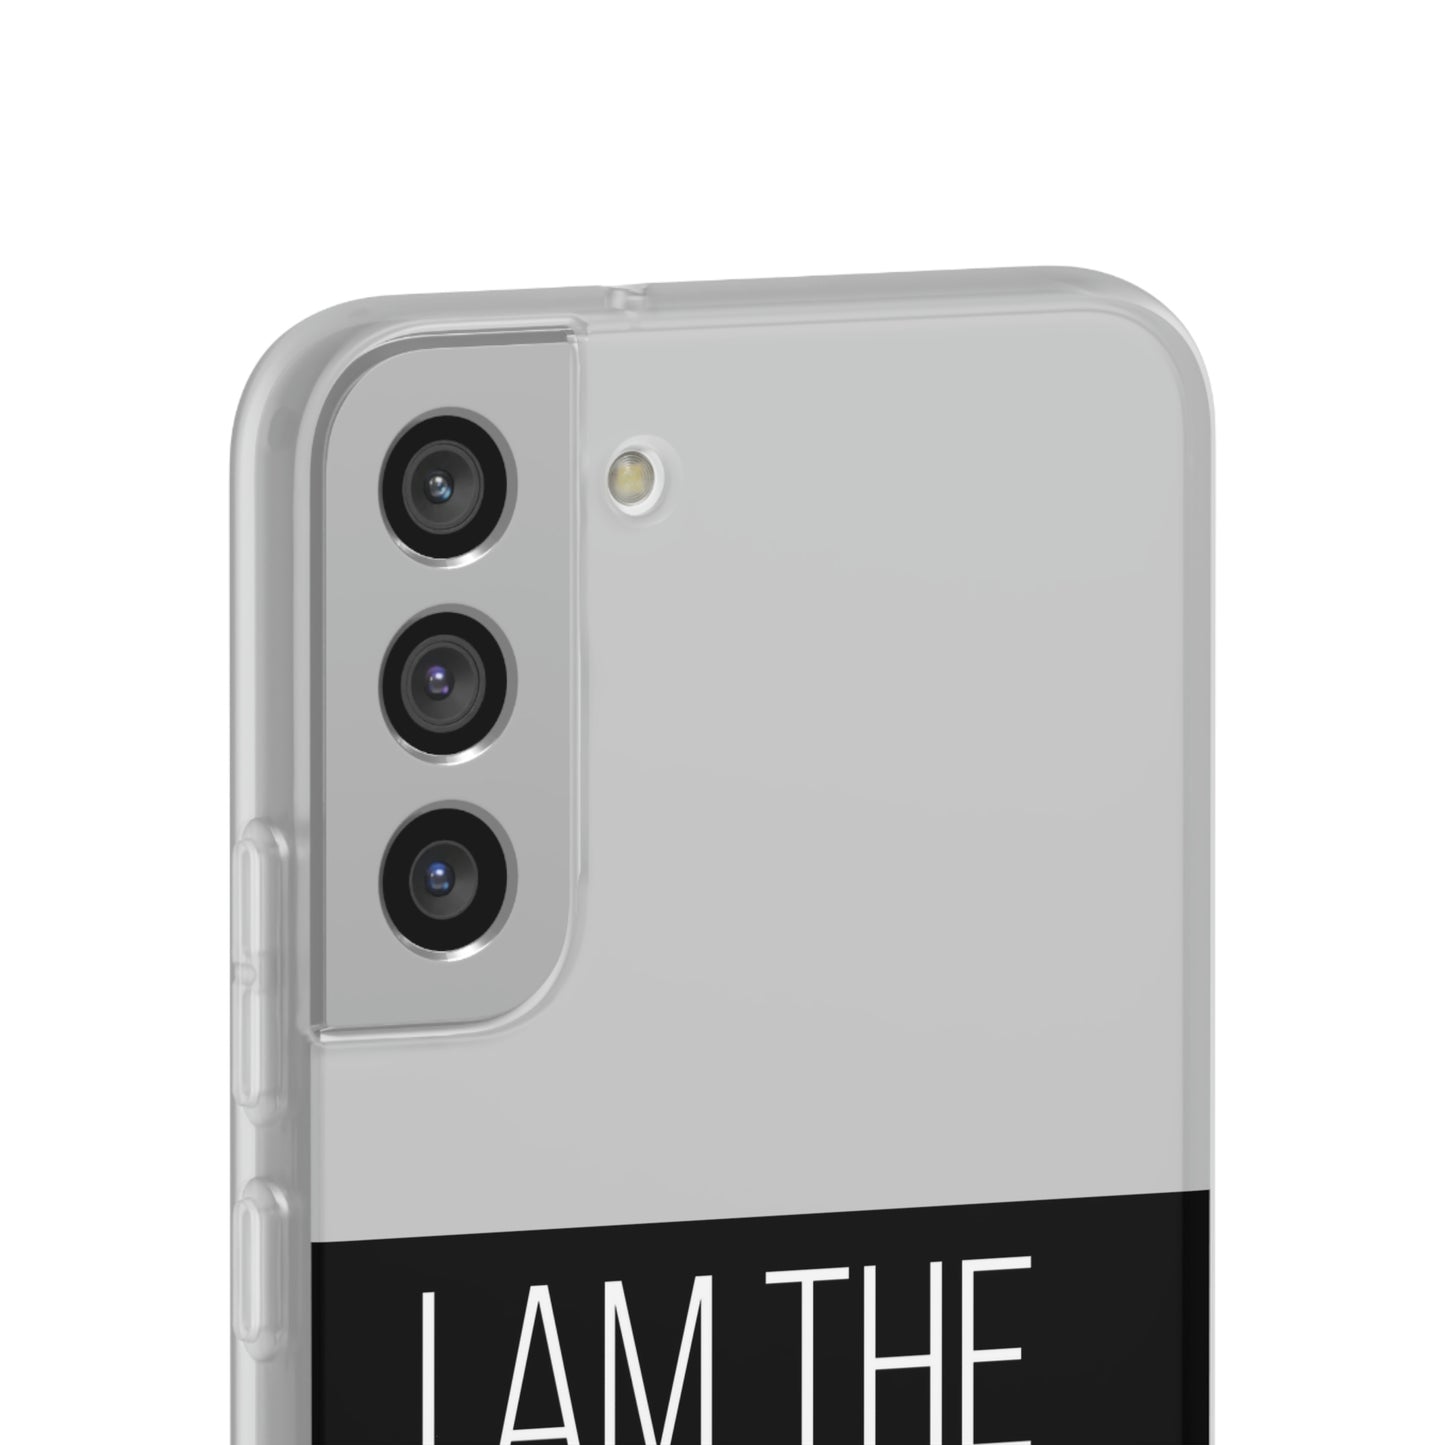 I Am The Nobody The World Saw But The One He Knew Was Worth Dying For Flexi Phone Case